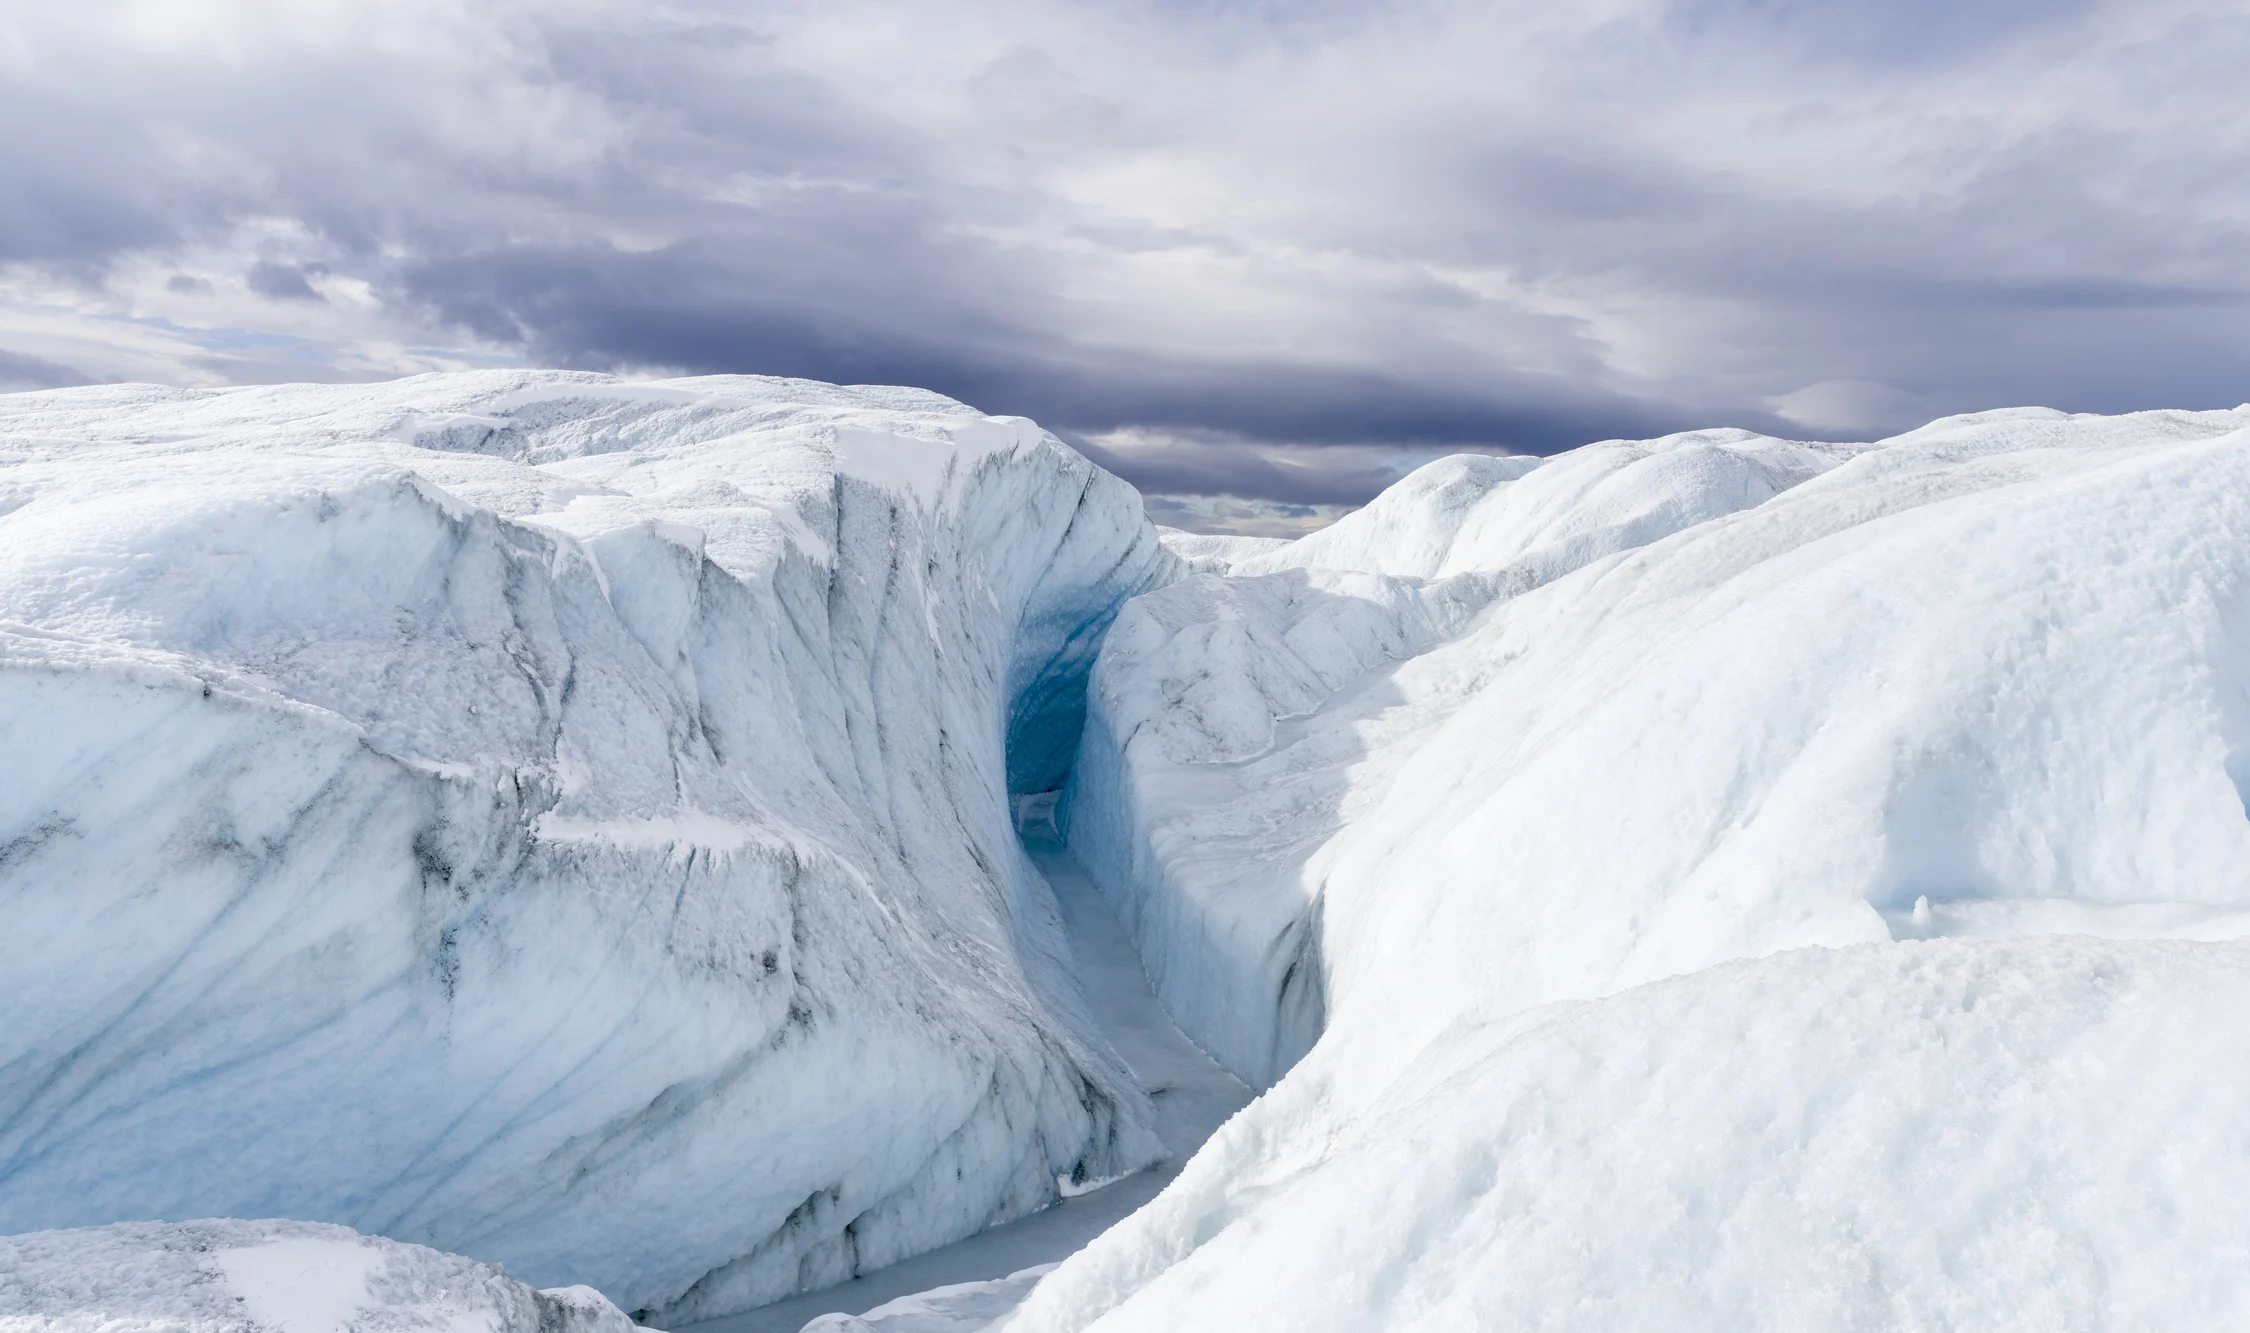 greenland ice sheet (Martin Zwick/REDA&CO/Universal Images Group. Getty Images)